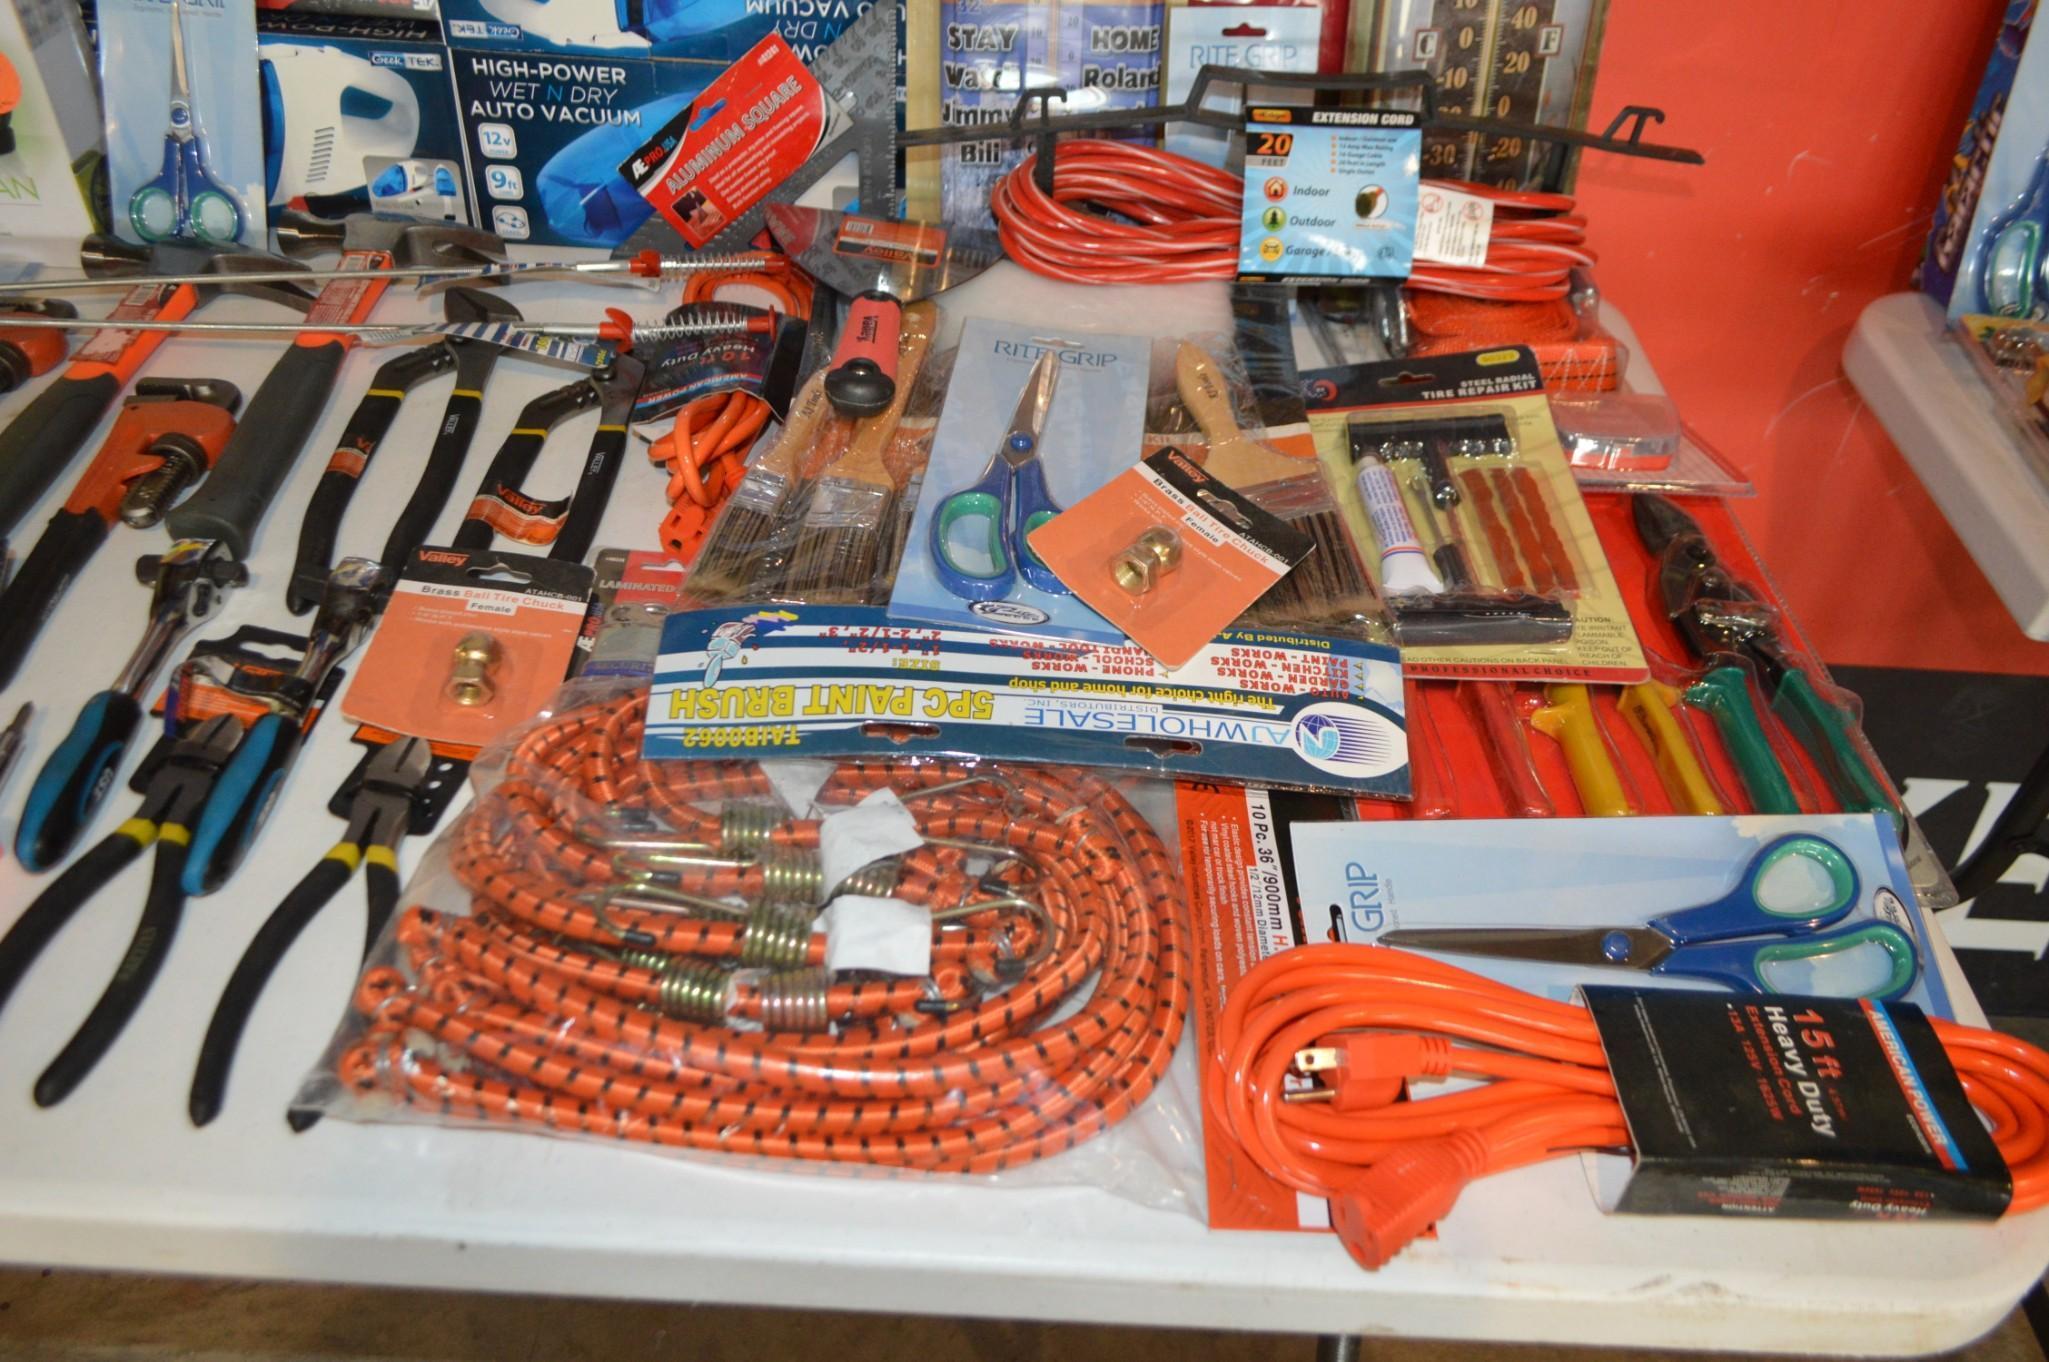 Assorted Outdoor Gear, Automobile Tools, and other Miscellaneous Accessories